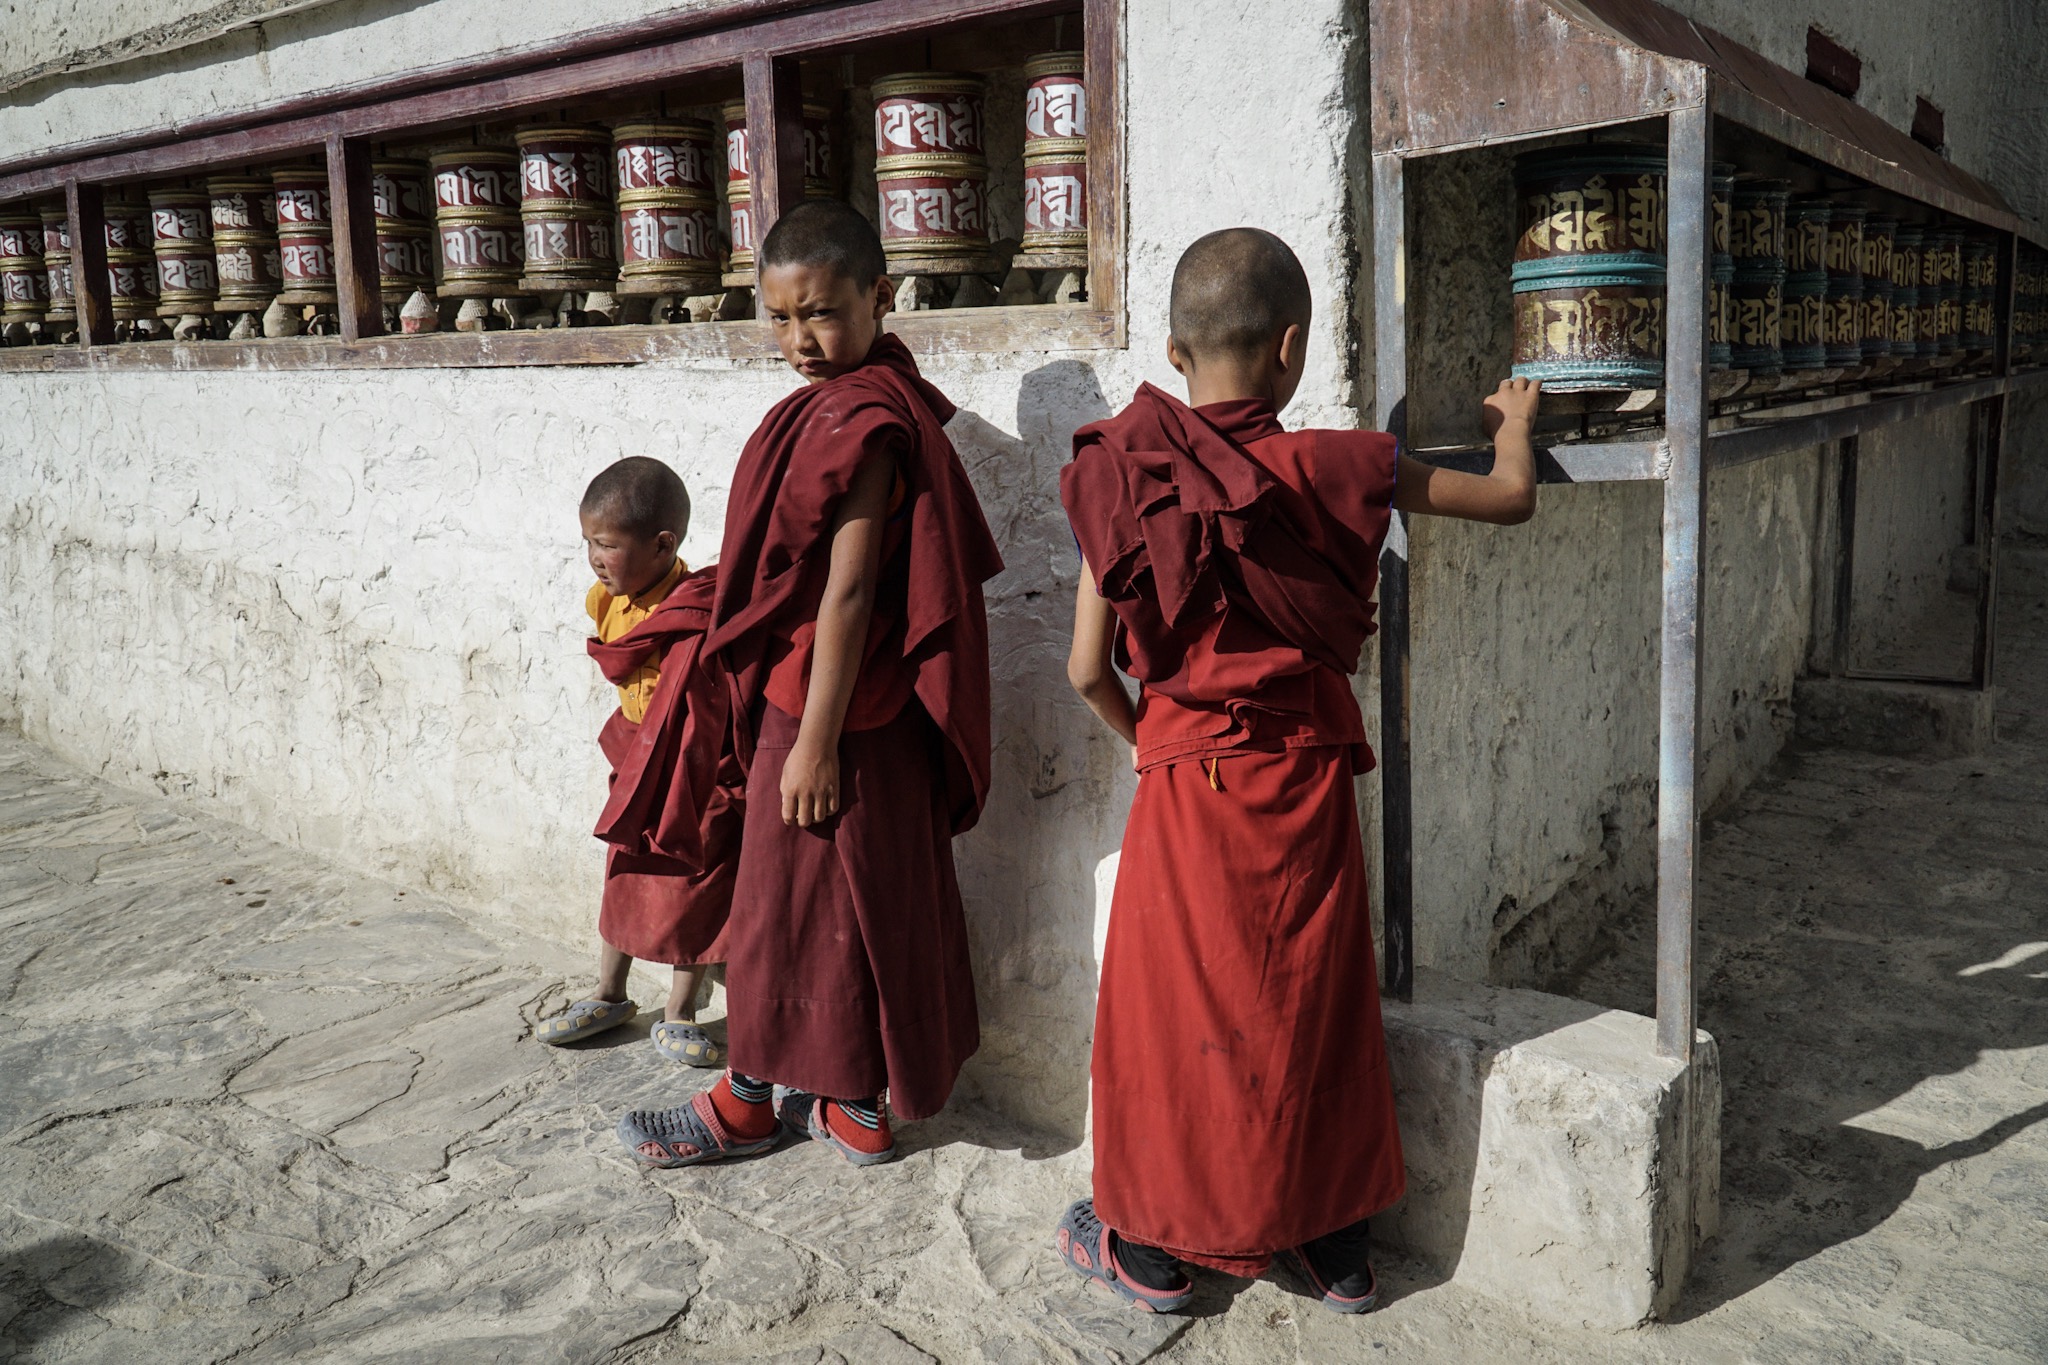 The boys stop at the monastery’s old prayer wheels, the Himalayan sun is strong and sharp.